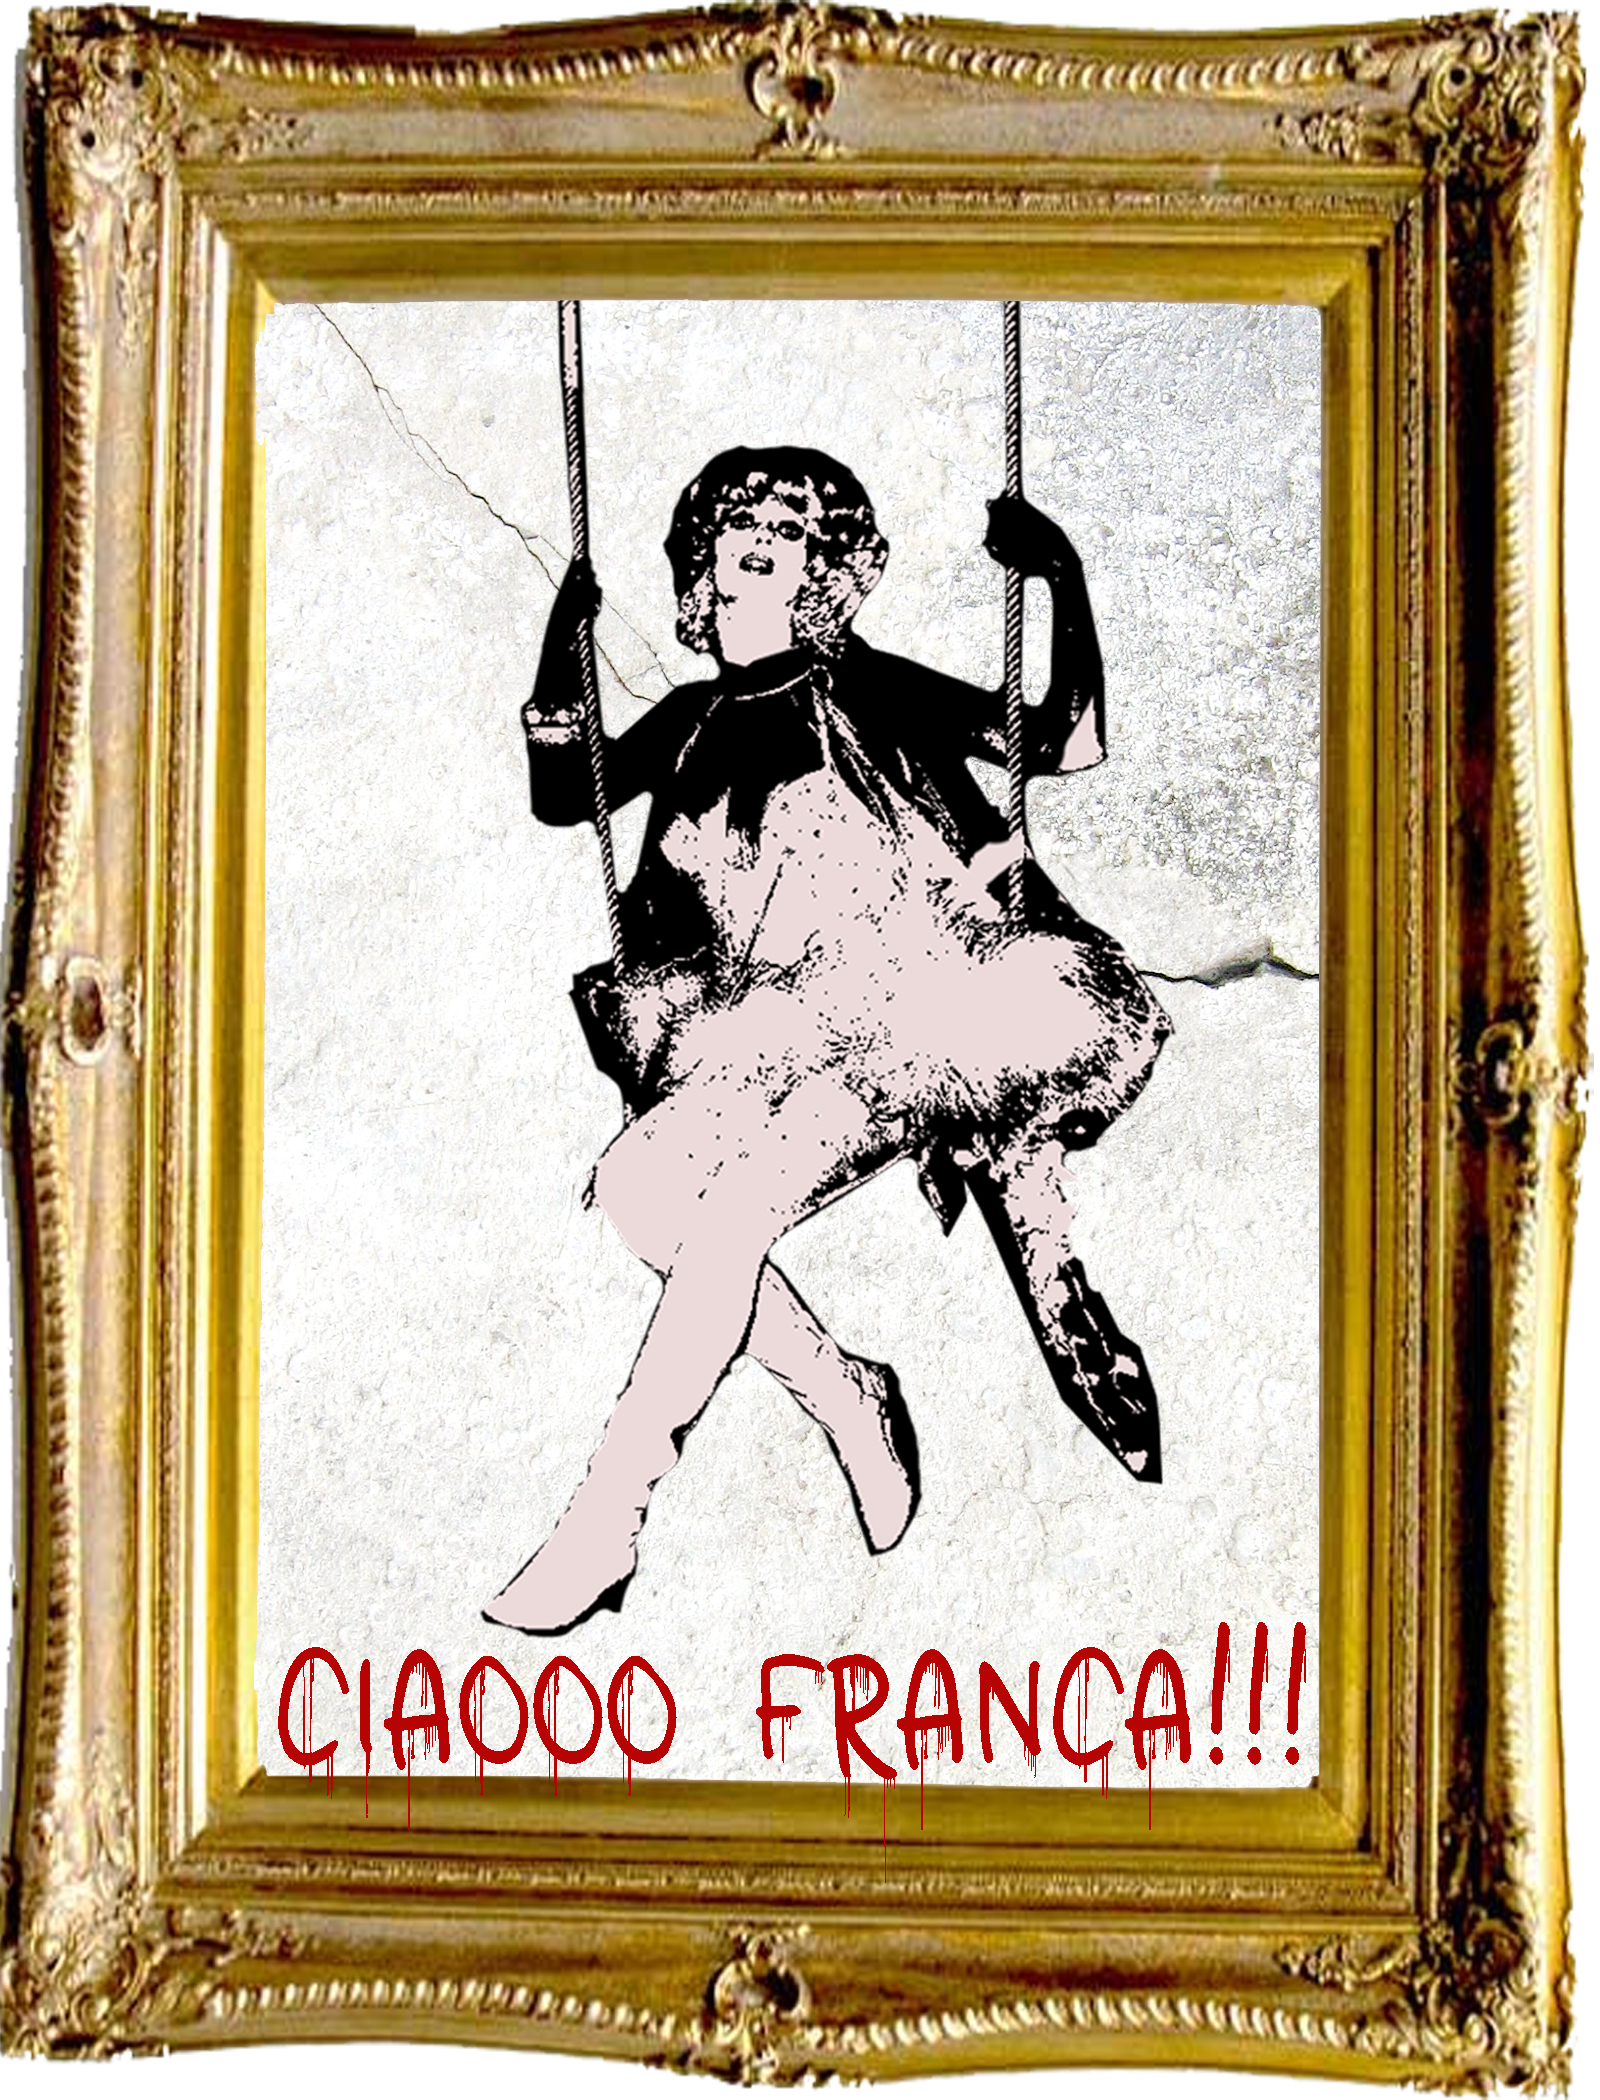 Ciaooo Franca!!! - My Tribute to Franca Rame